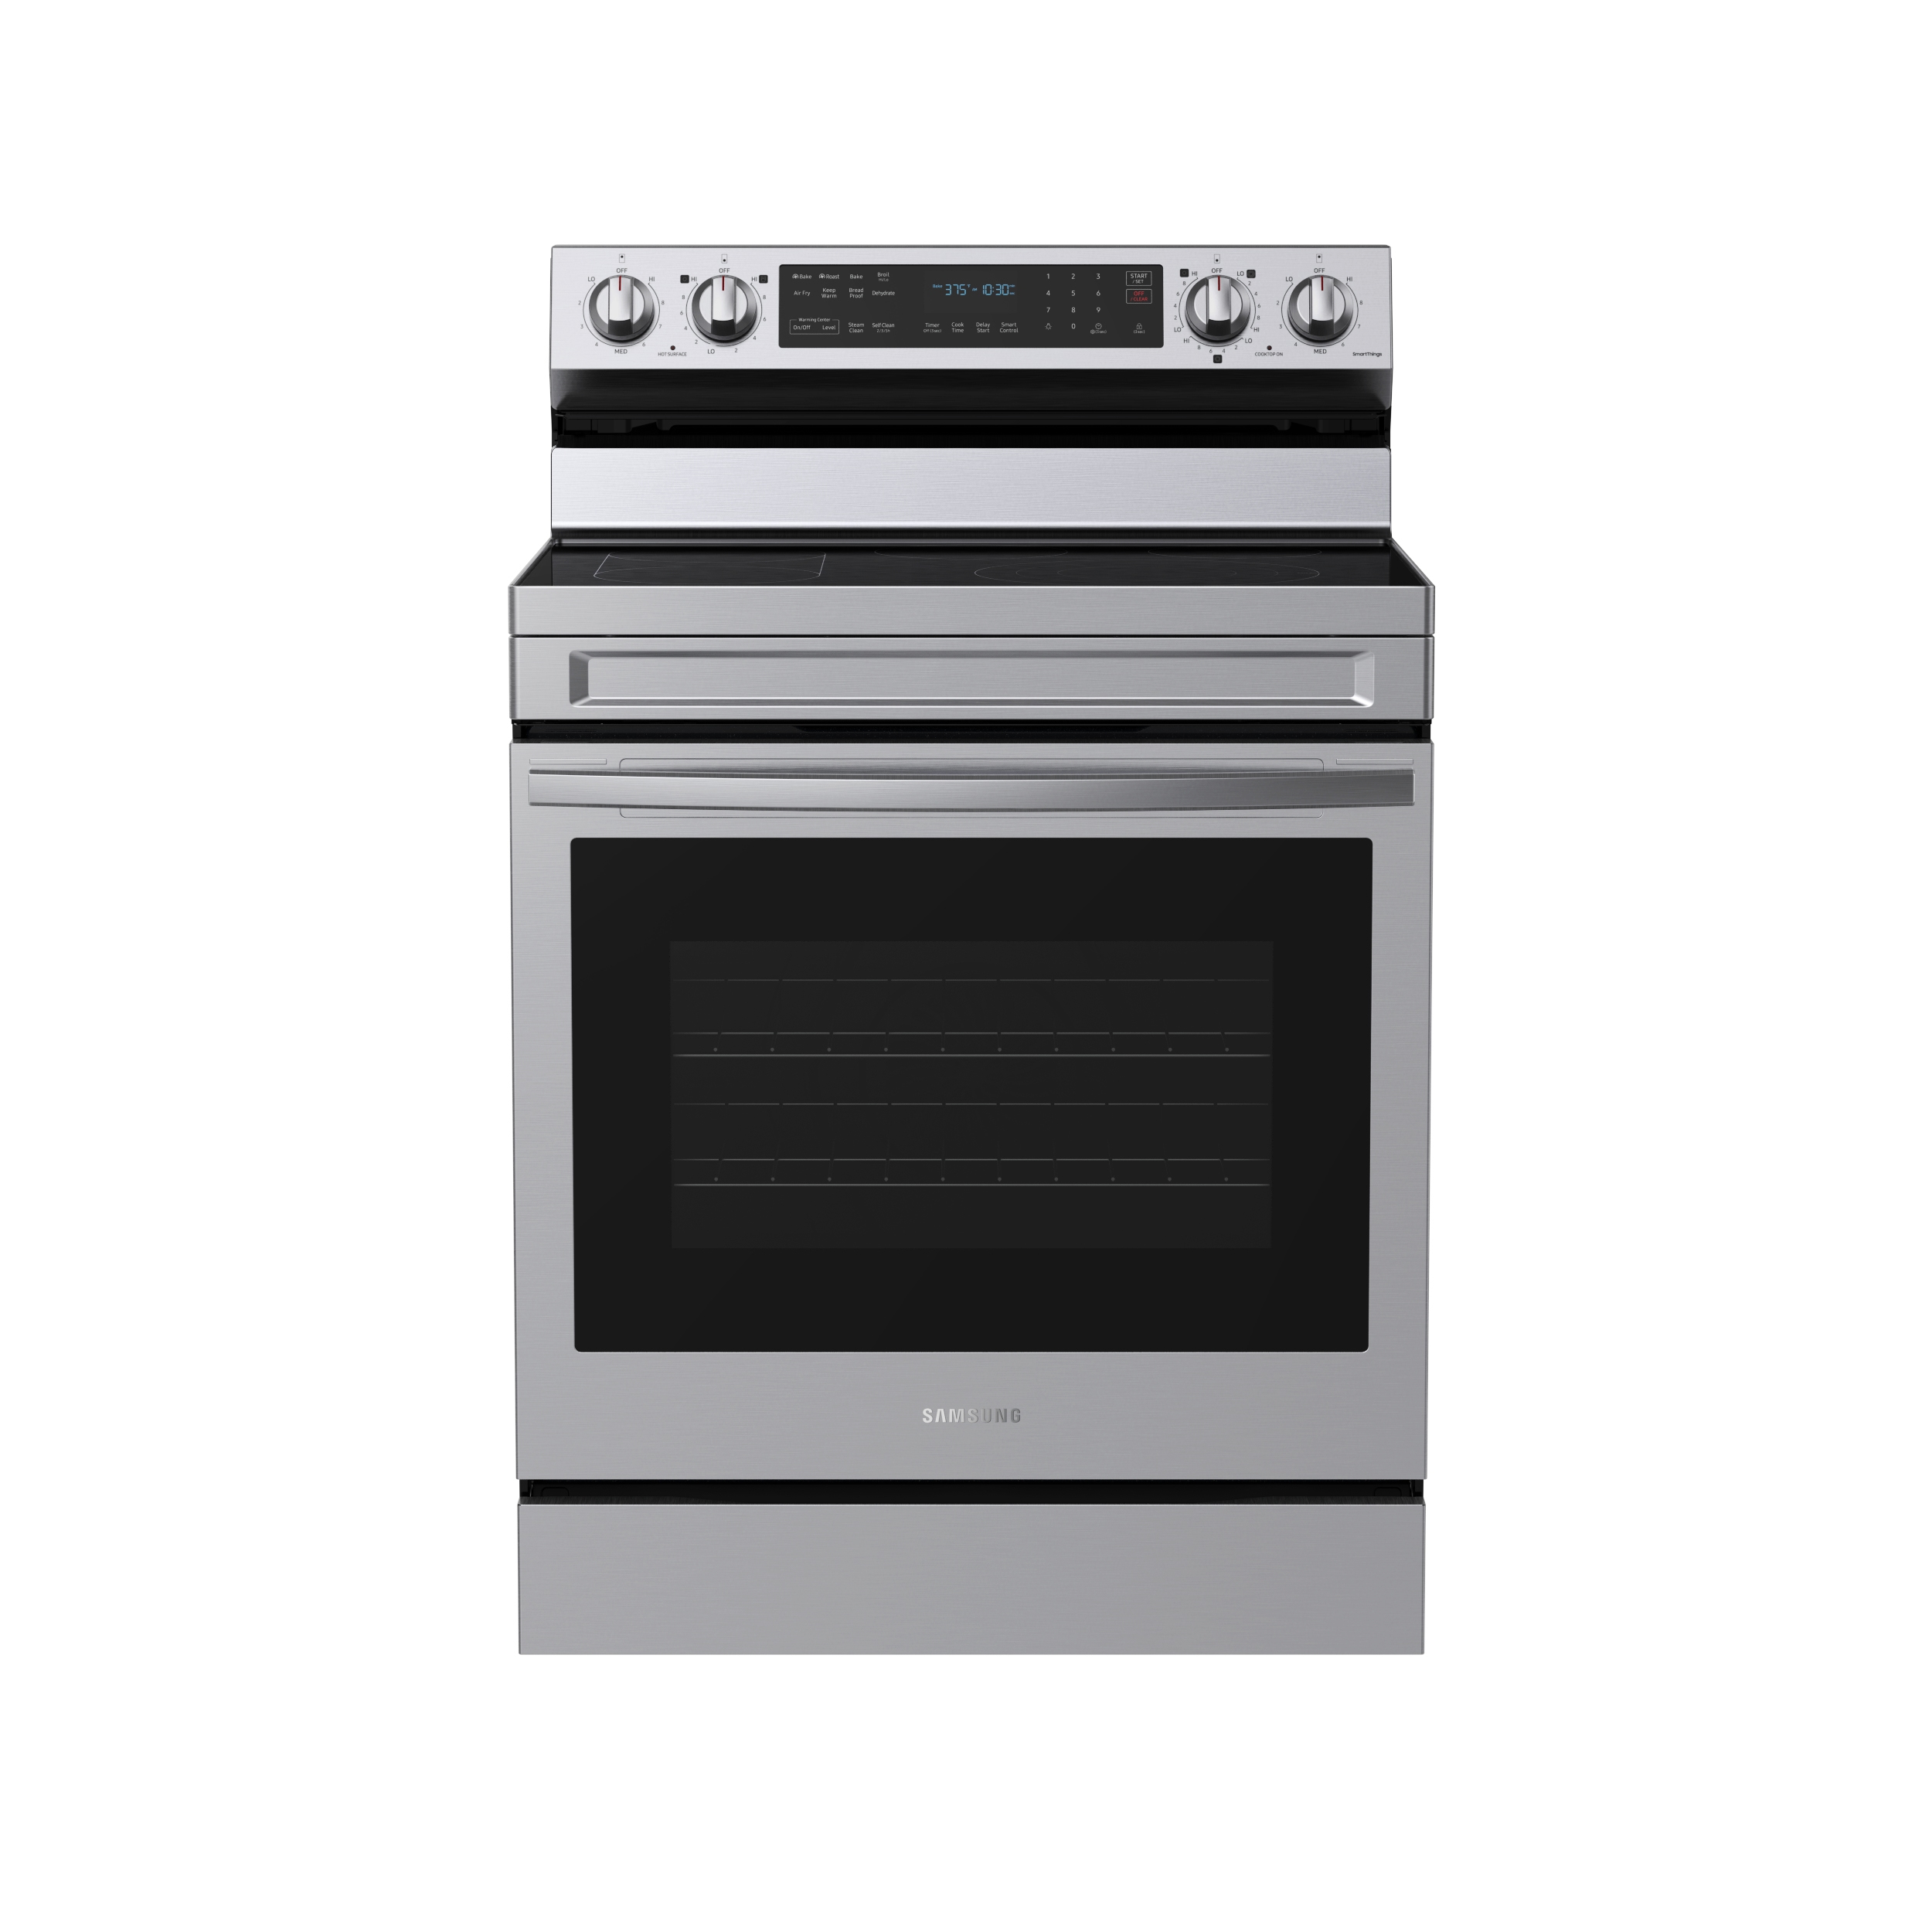 6.3 cu. ft. Smart Freestanding Electric Range with No-Preheat Air Fry,  Convection+ & Griddle in Stainless Steel Ranges - NE63A6711SS/AA